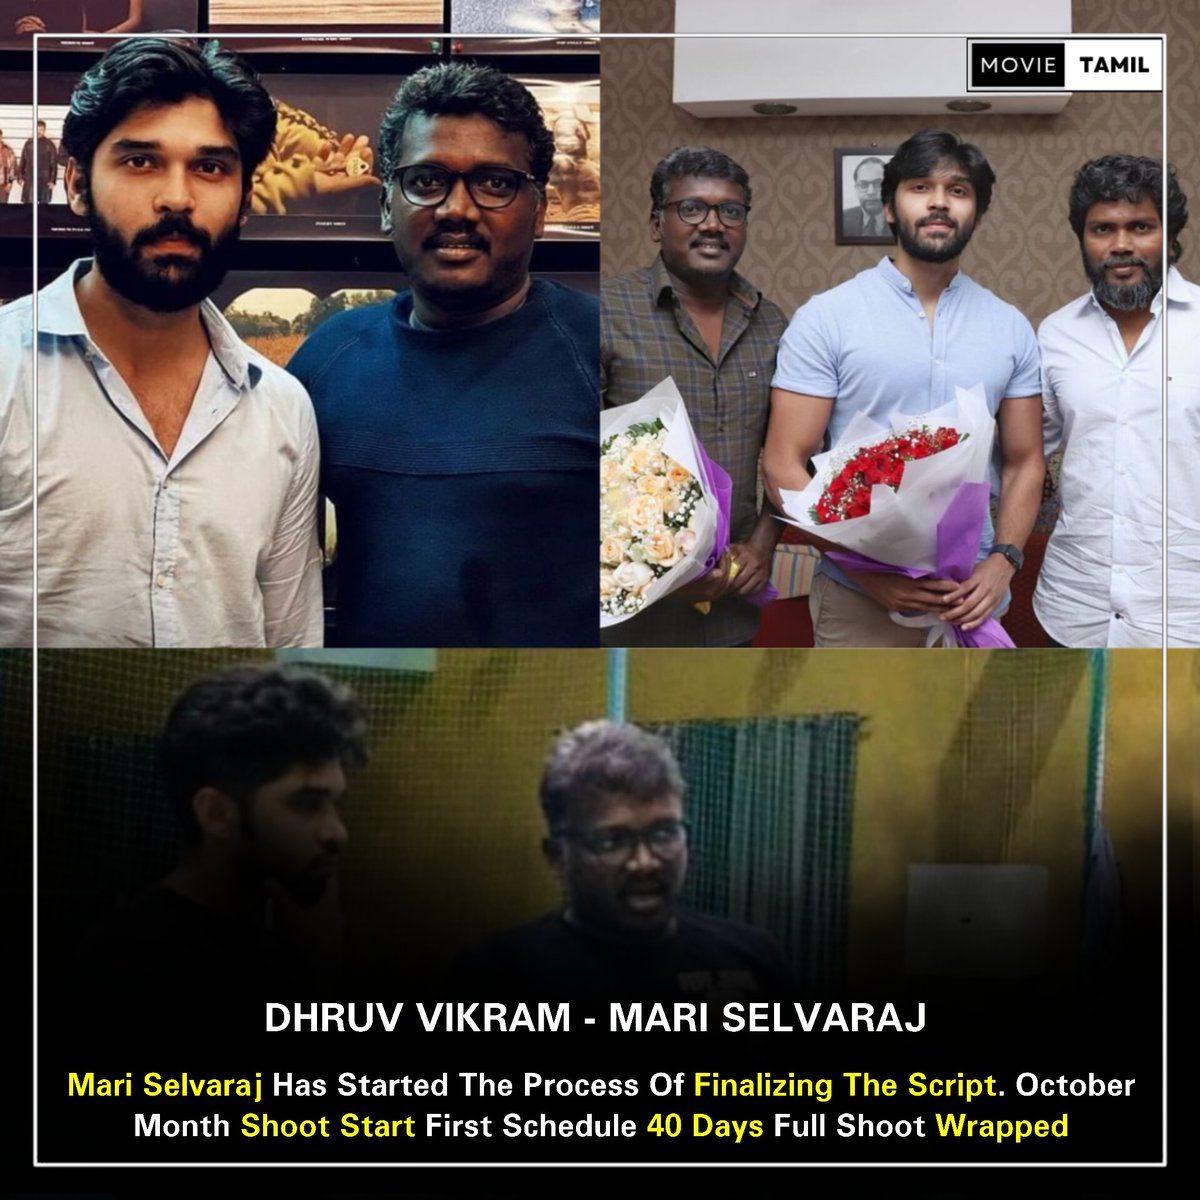 Exclusive

🔹#MariSelvaraj - #DhruvVikram Project

Follow For More Updates 🙏

🔸Tirunelveli Shoot From October Month 40 Days Plan Next Month Official Update & First Look Release Plan.
#NeelamProductions - #PaRanjith